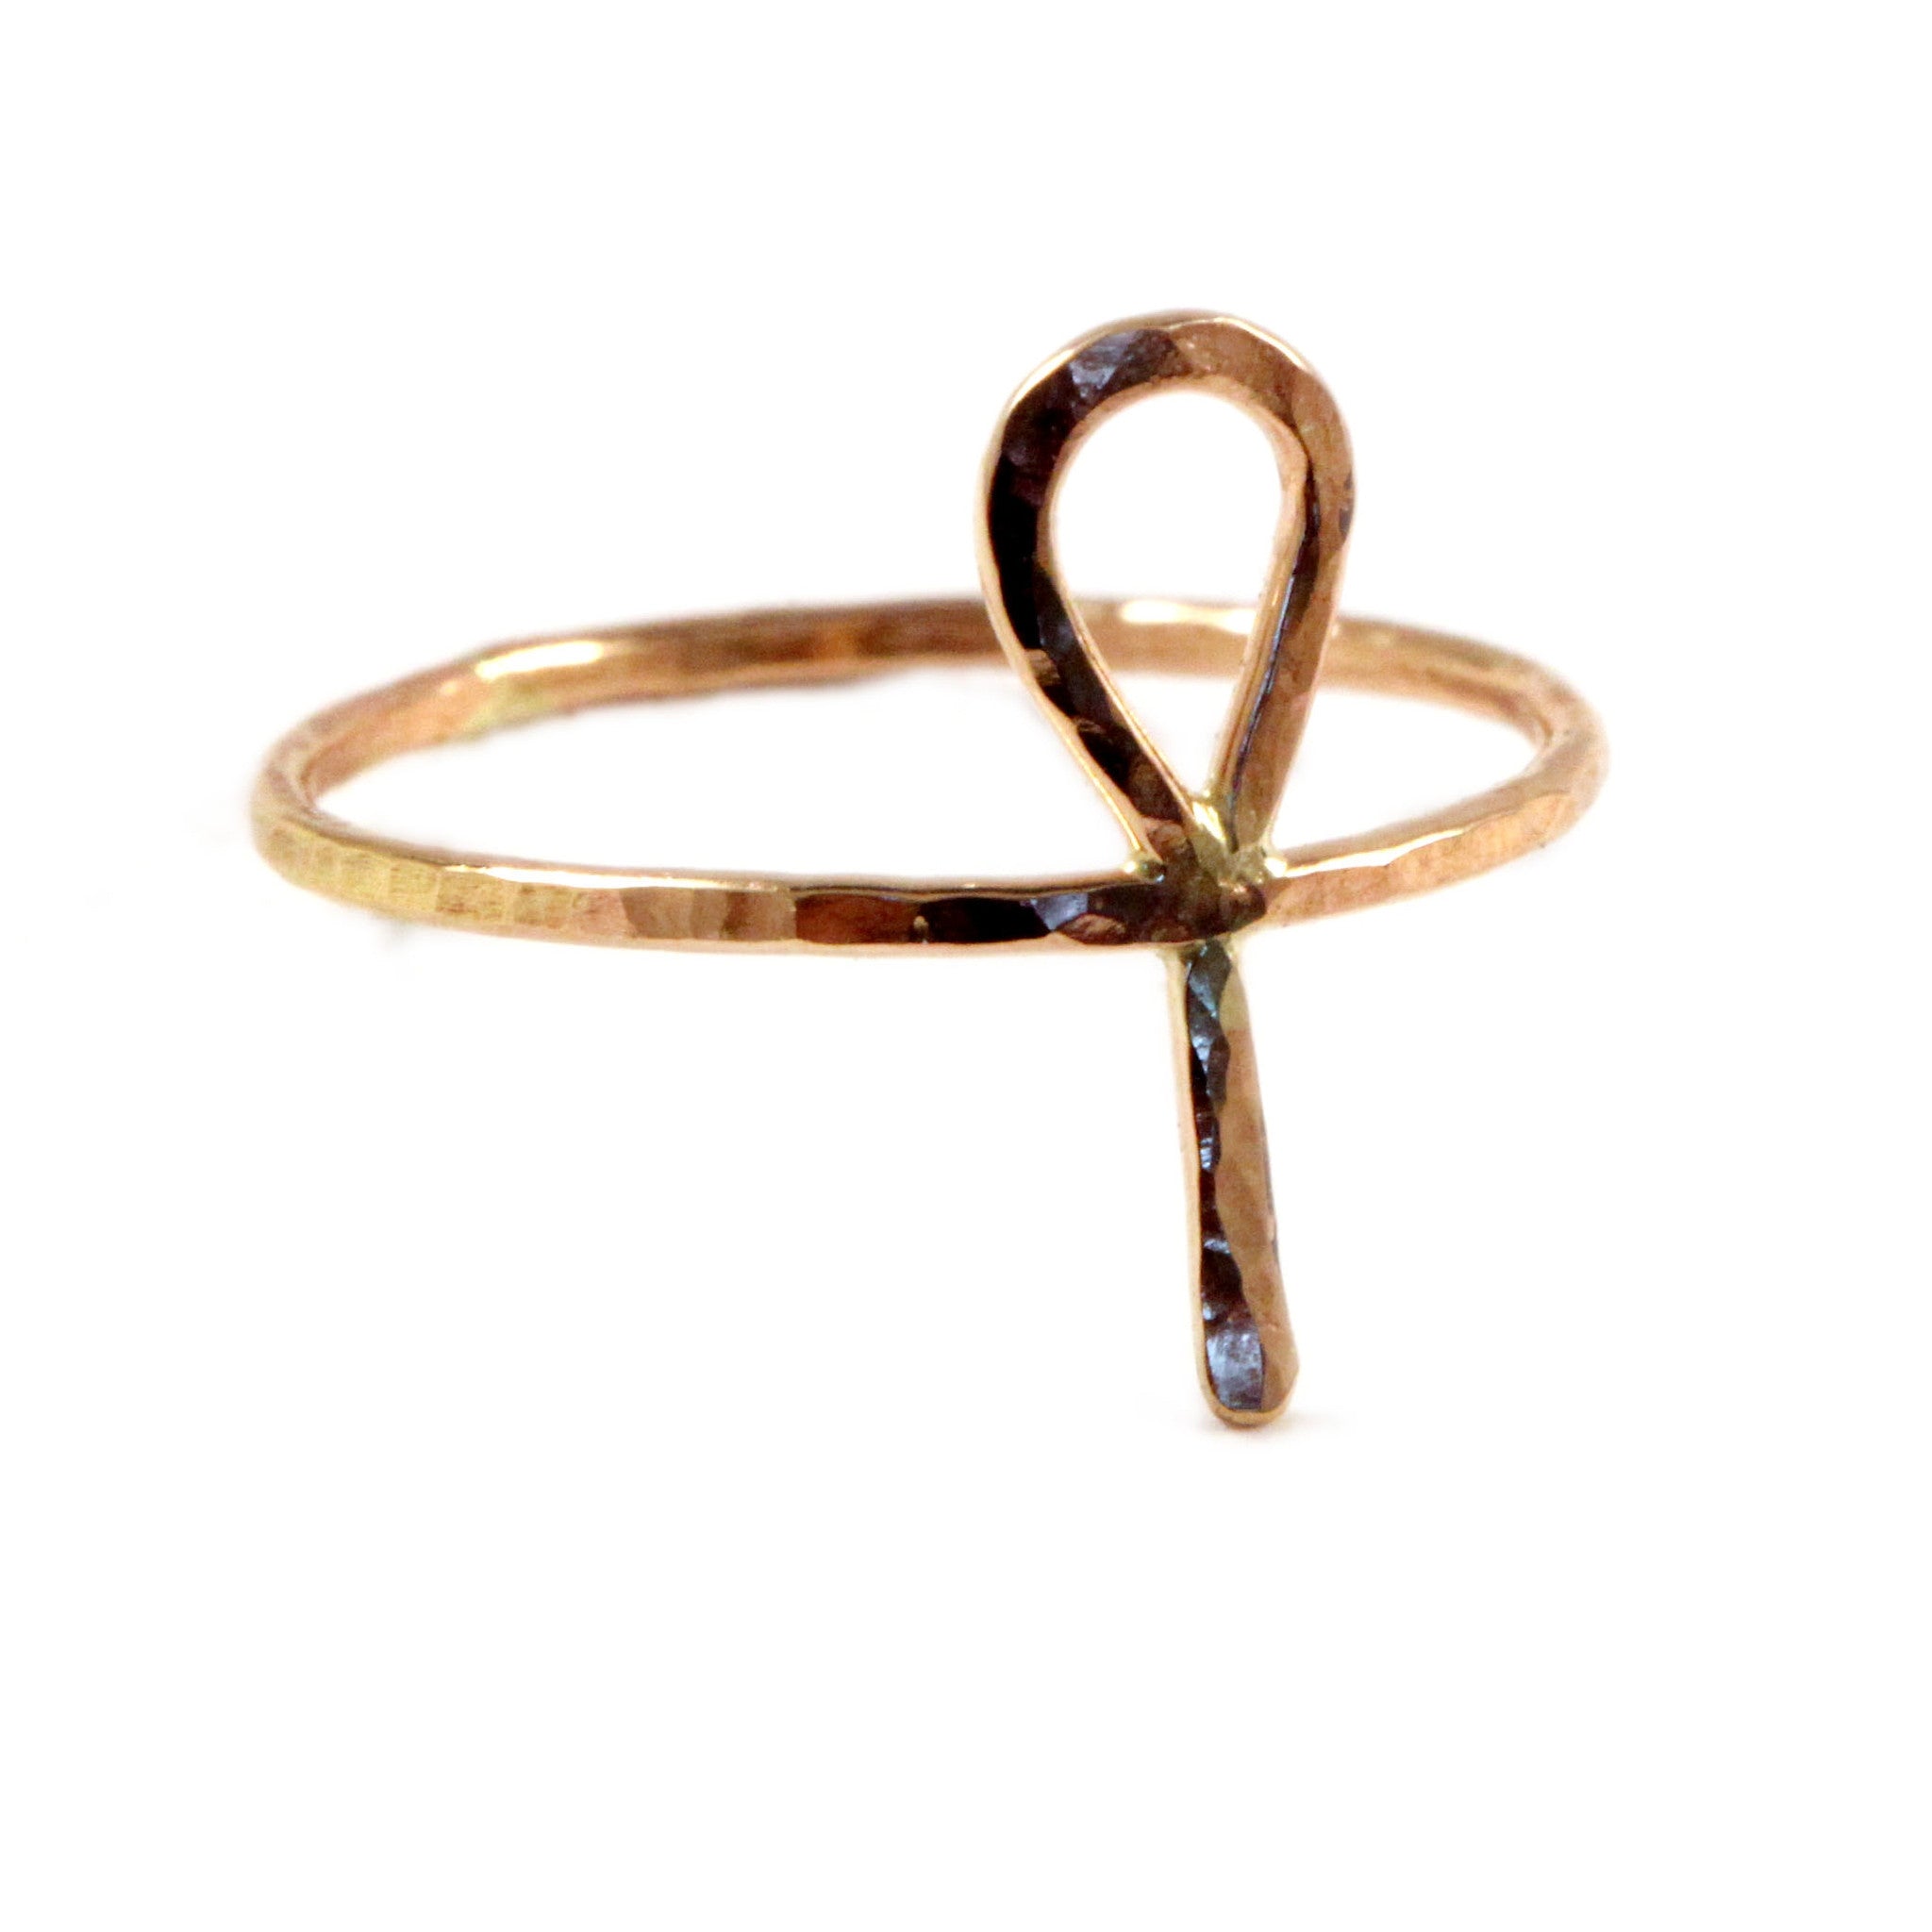 Buy Vintage 14ct Gold Ankh Ring Size Q.5 / 8.25 Online in India - Etsy